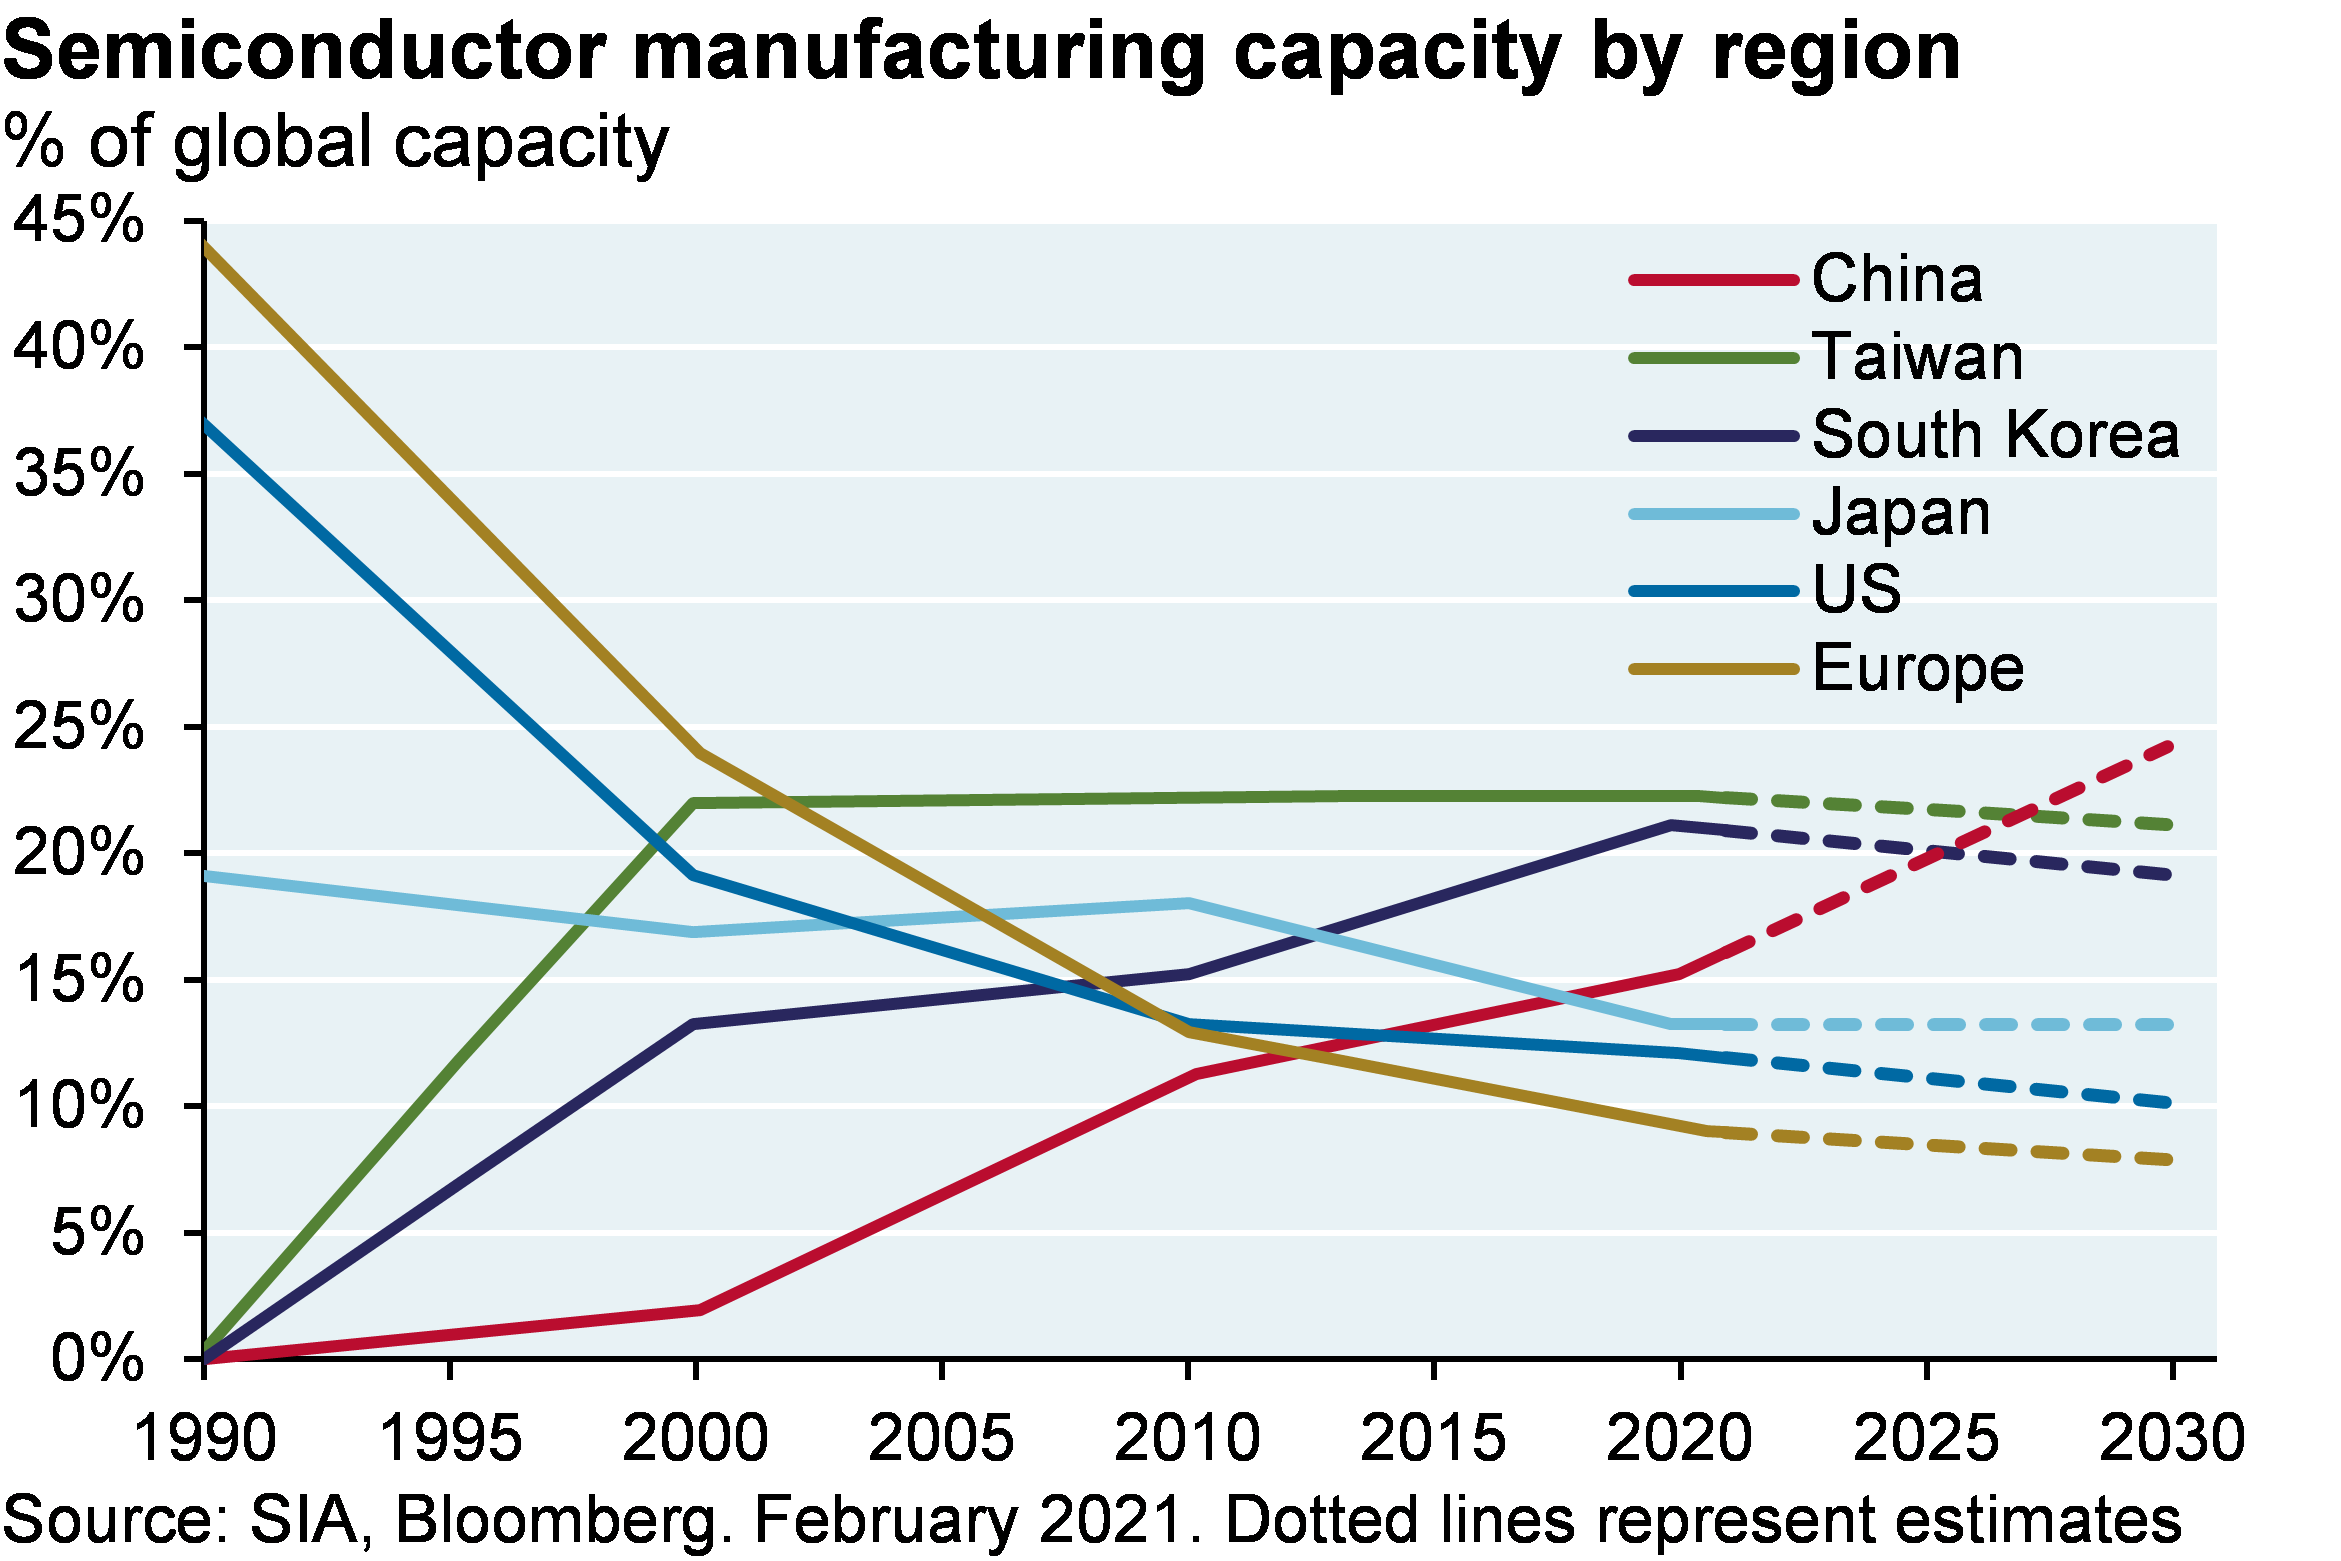 Semiconductor manufacturing capacity by region